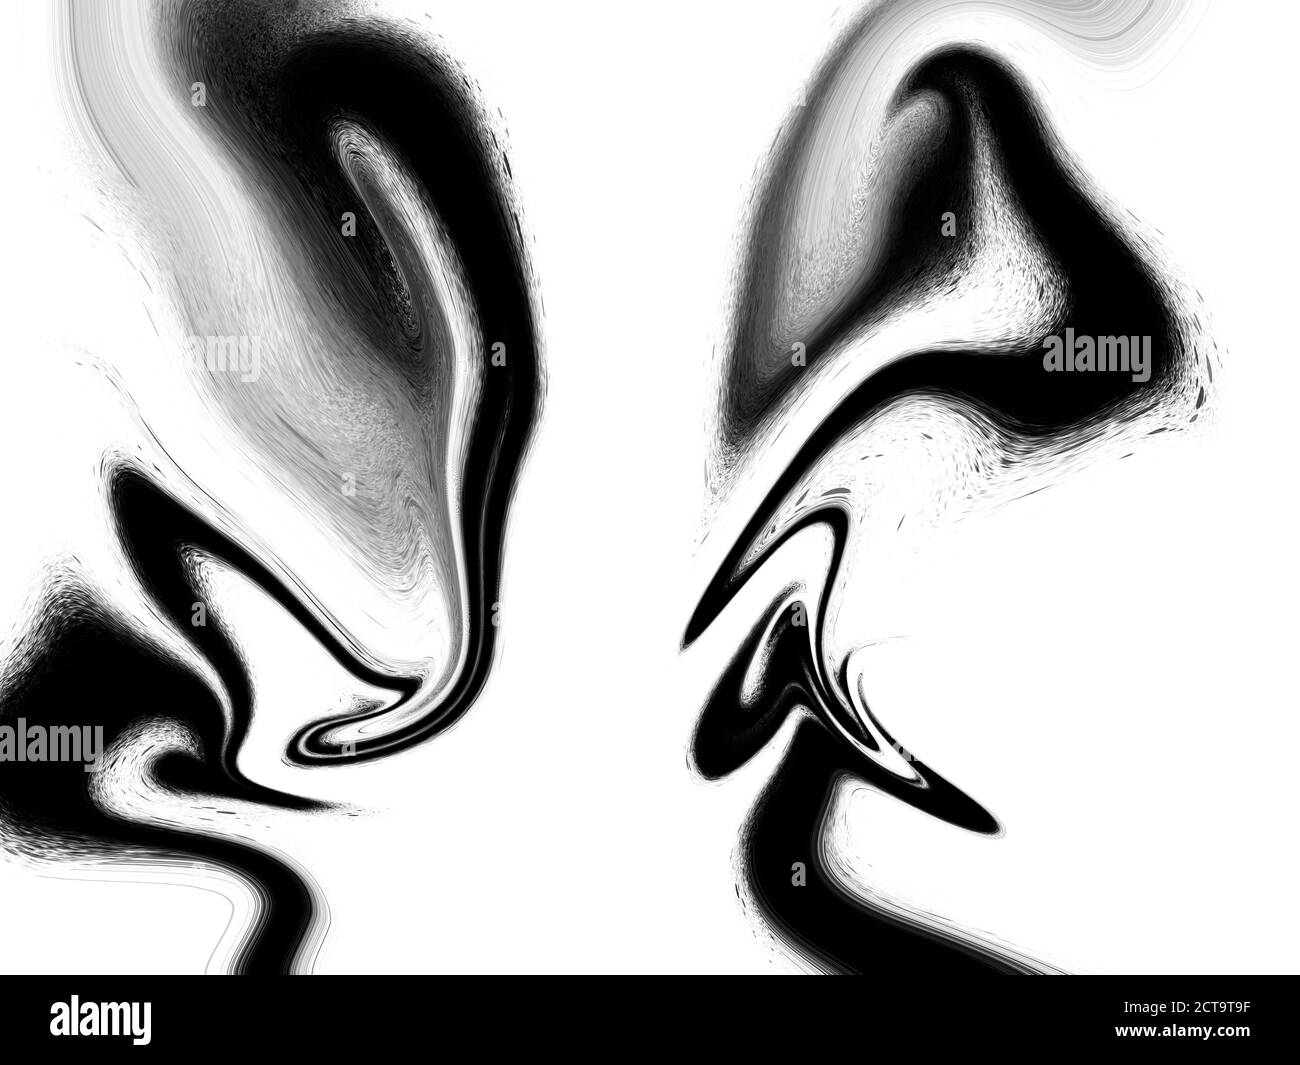 https://c8.alamy.com/comp/2CT9T9F/abstract-black-and-white-marble-like-ink-drawing-background-high-resolution-jpg-file-perfect-for-your-projects-2CT9T9F.jpg